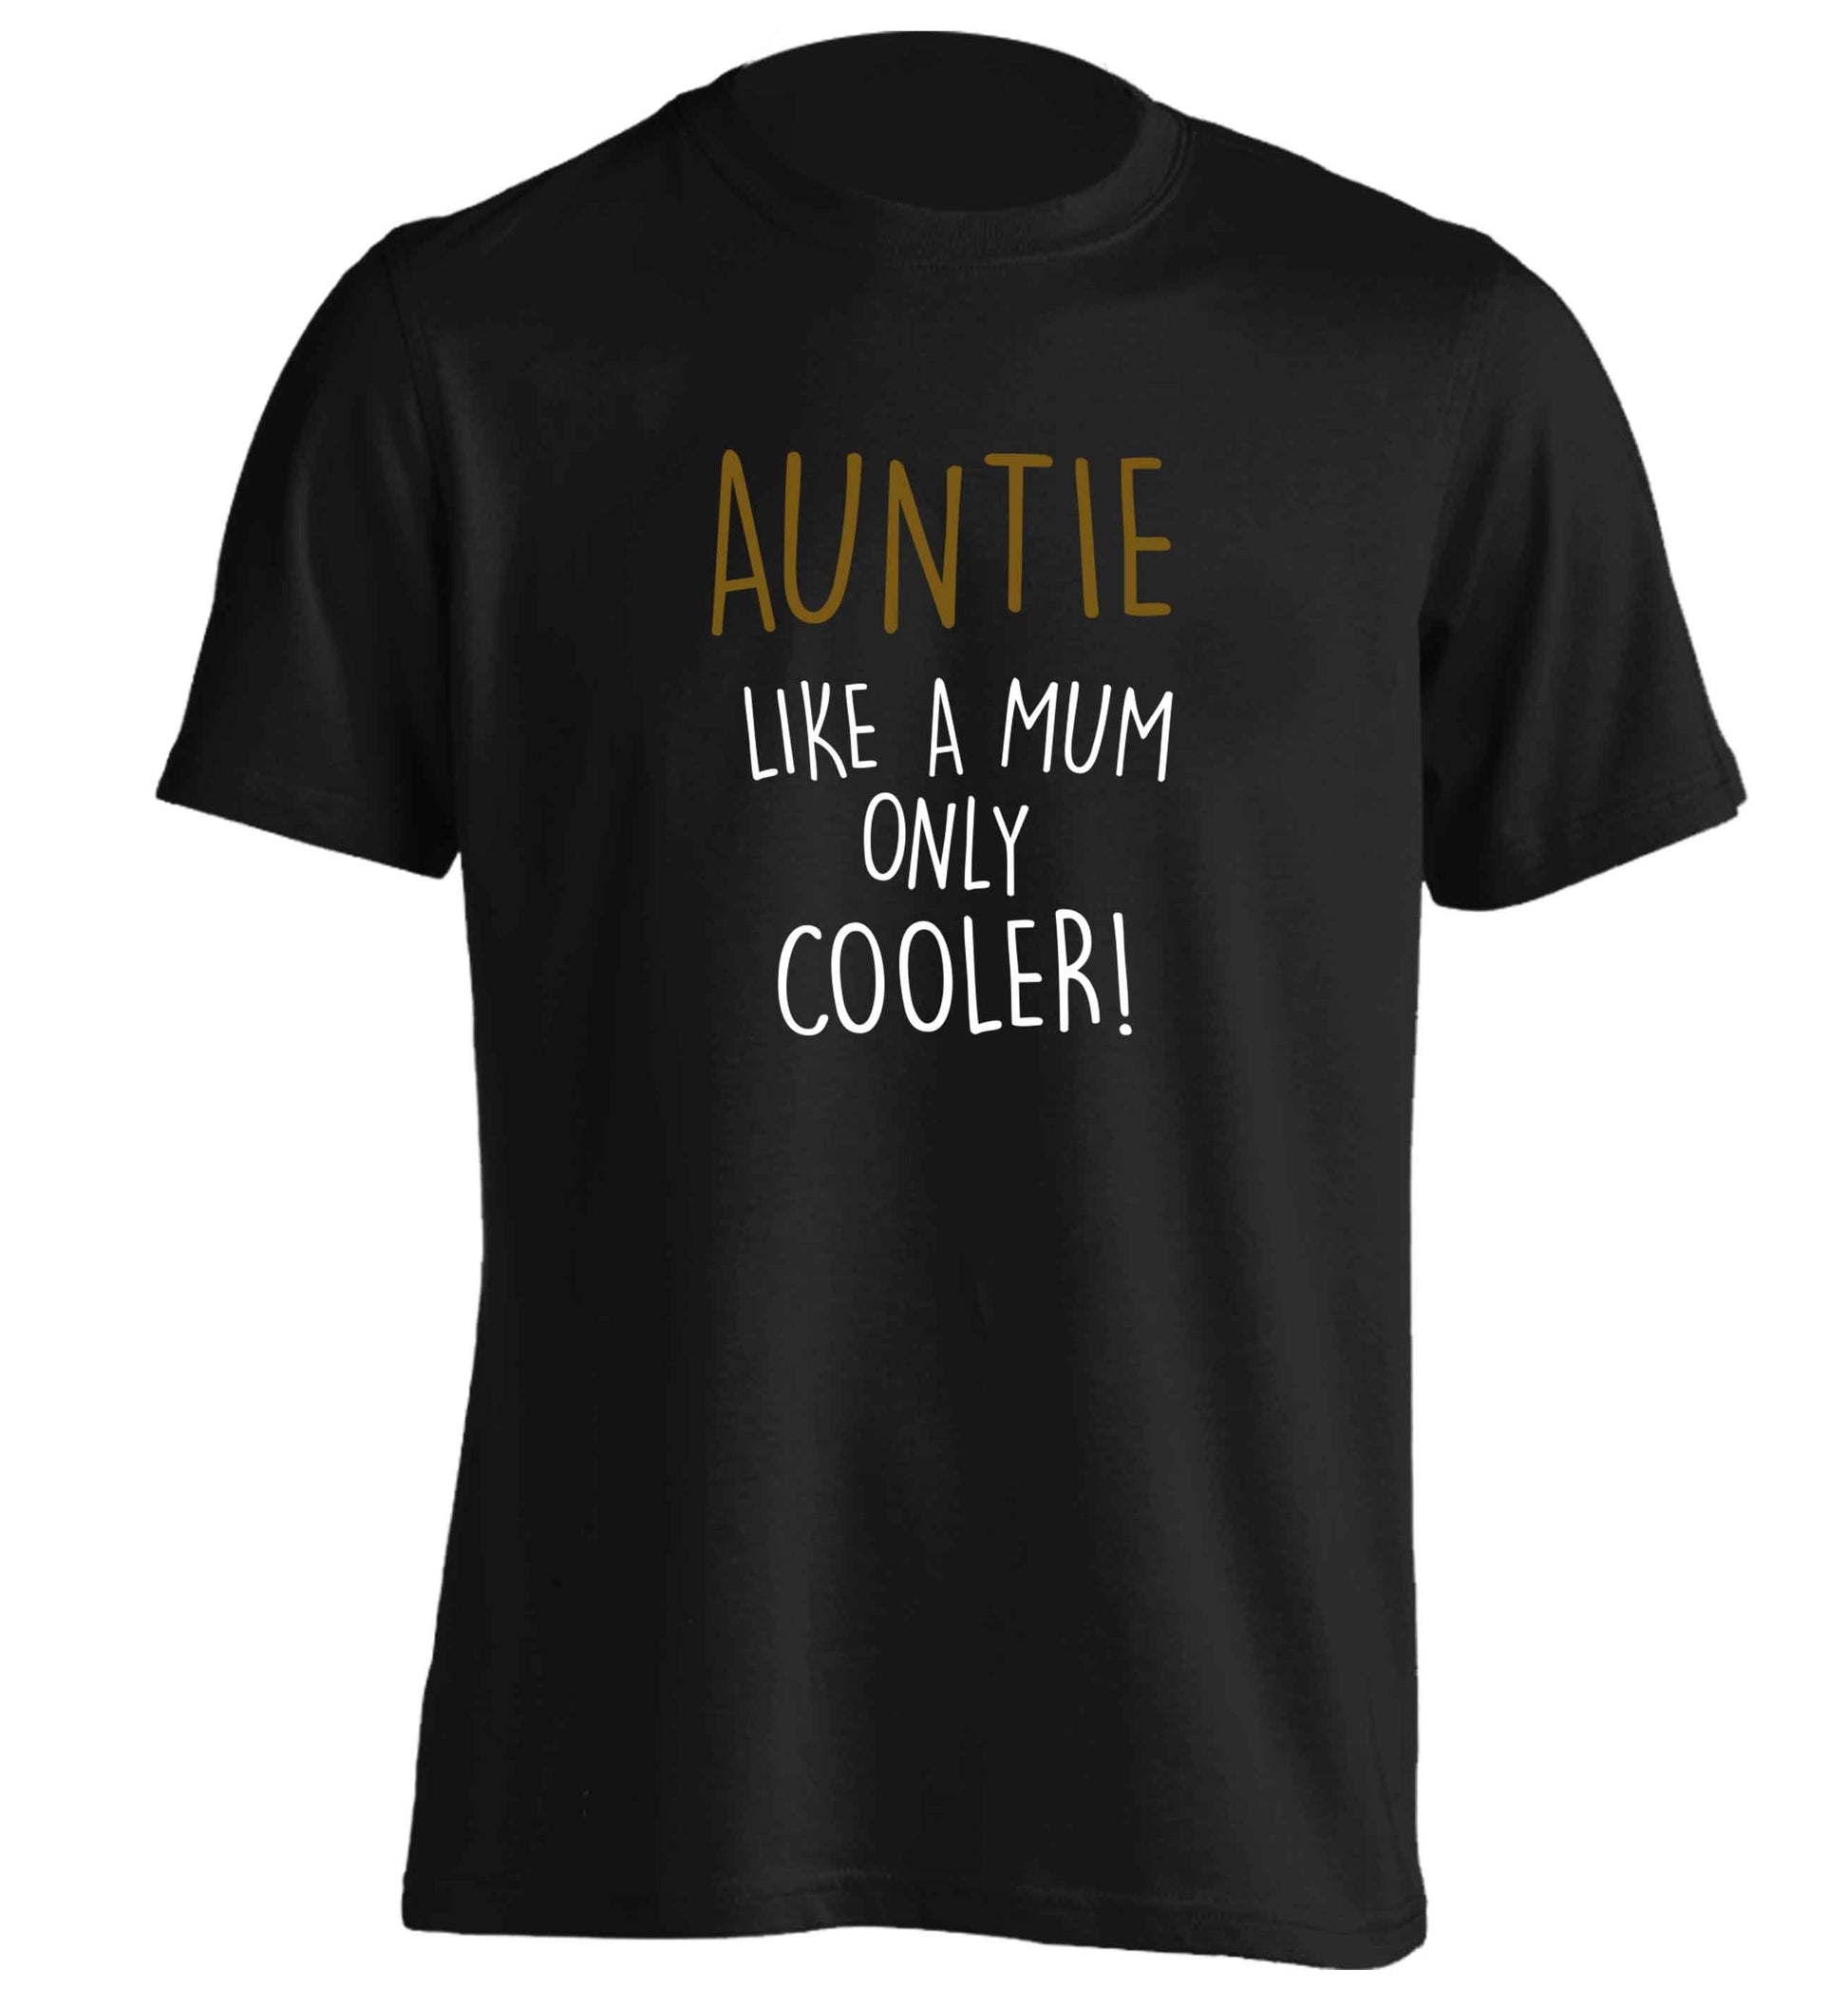 Auntie like a mum only cooler adults unisex black Tshirt 2XL